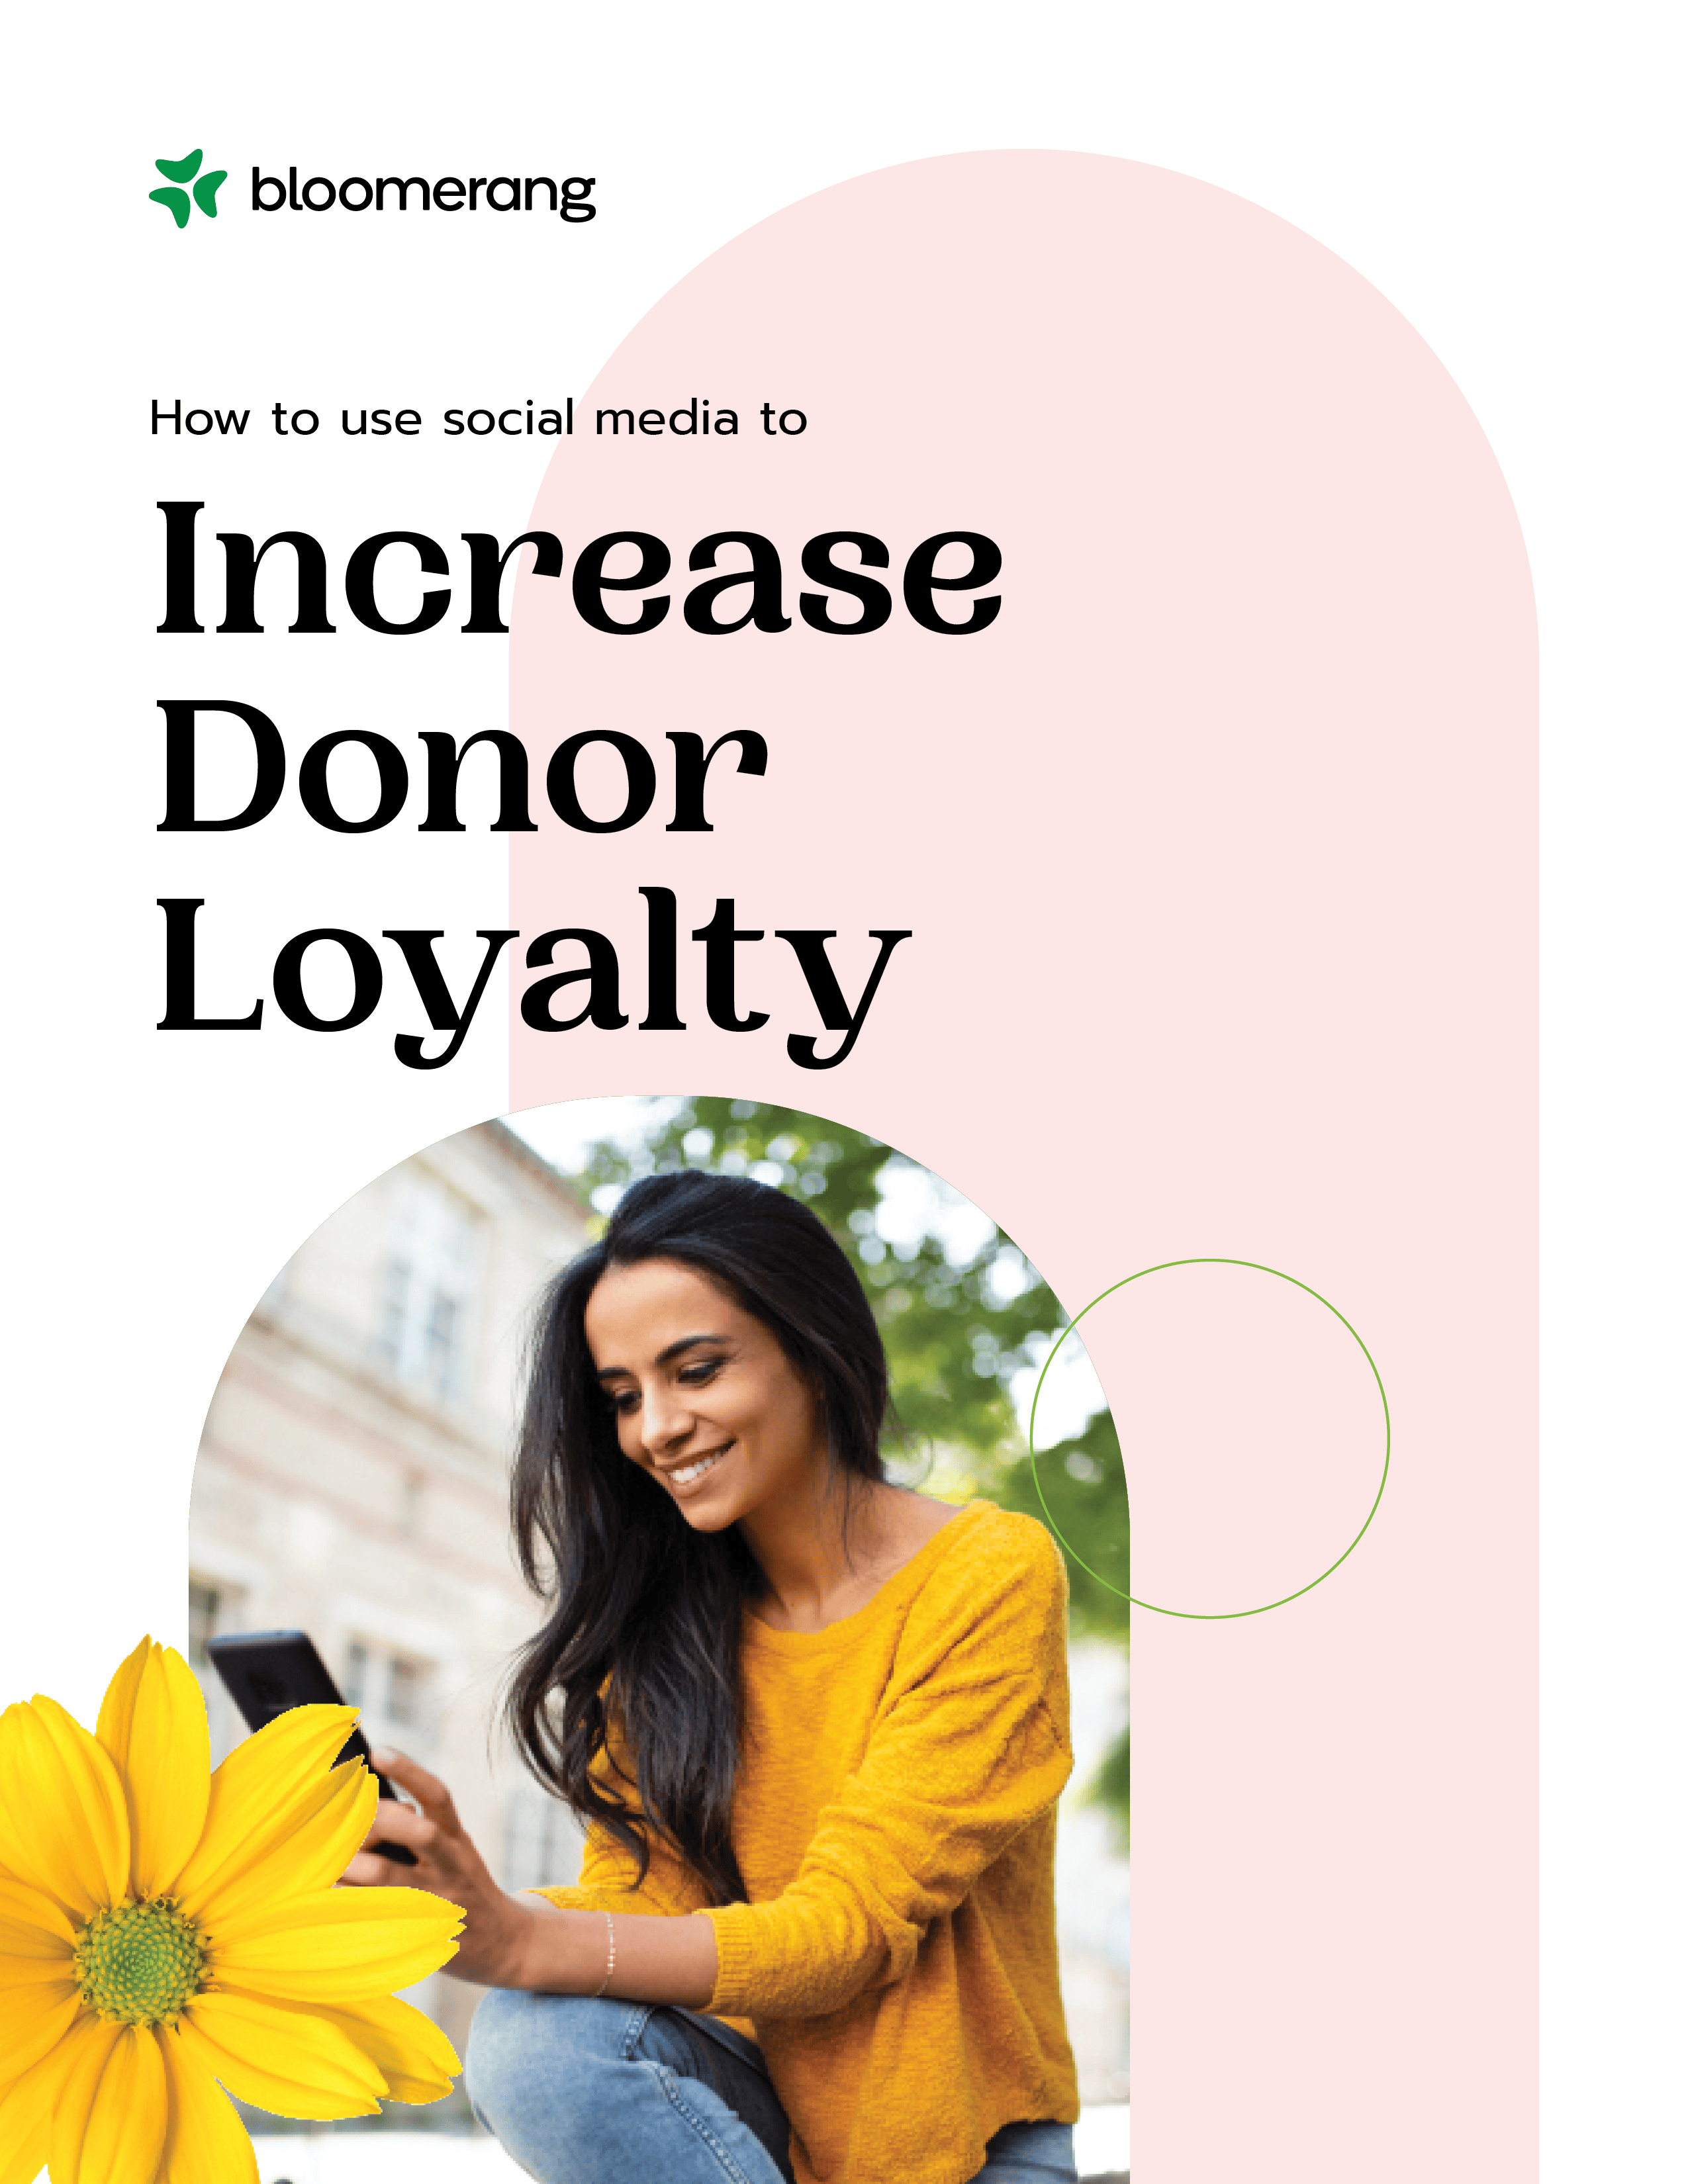 How to Use Social Media to Increase Donor Loyalty Guide Cover